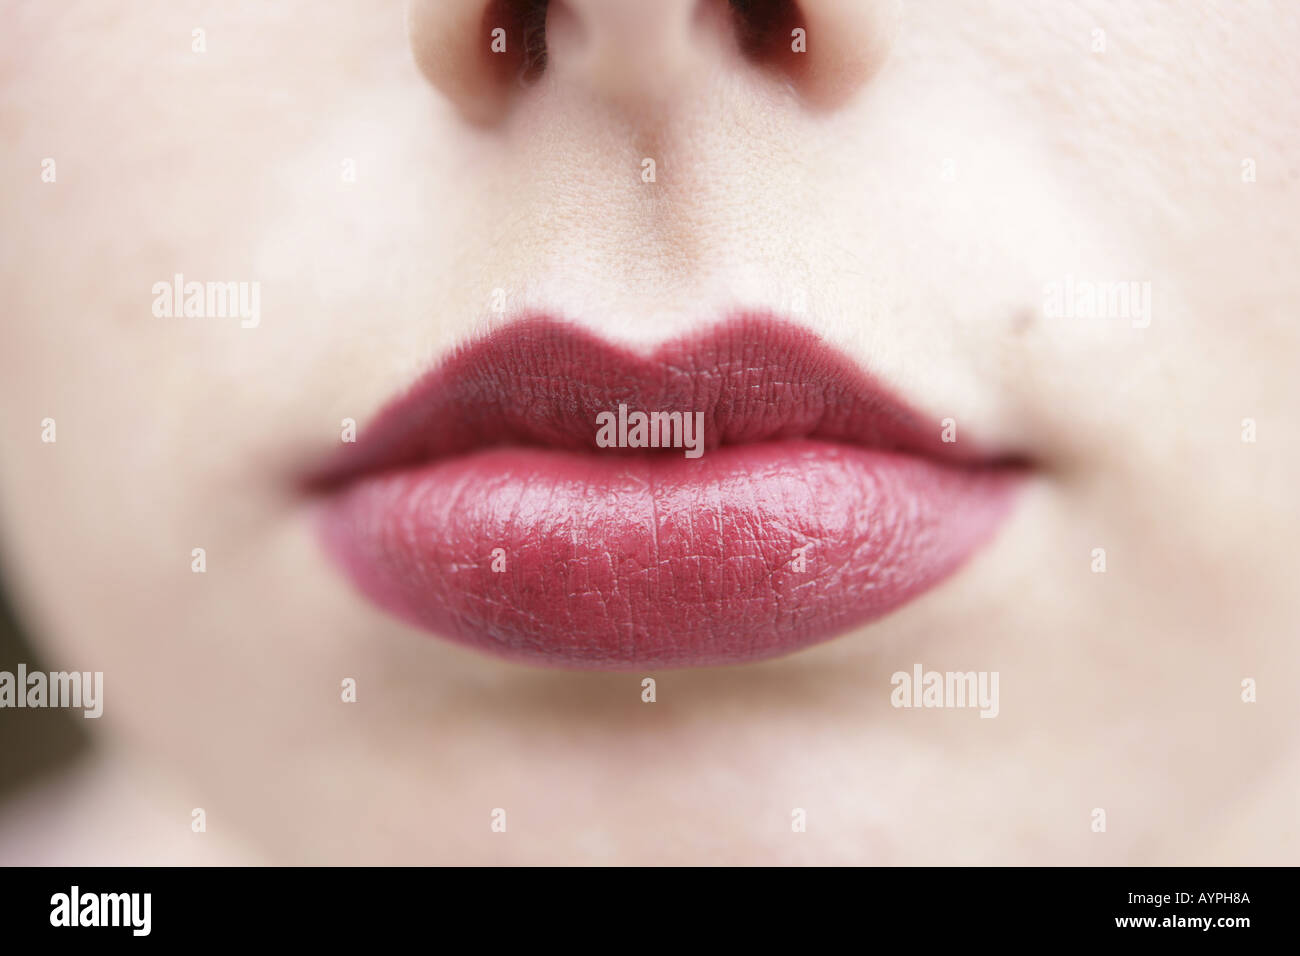 An extreme close up of the lips of a fair woman Stock Photo